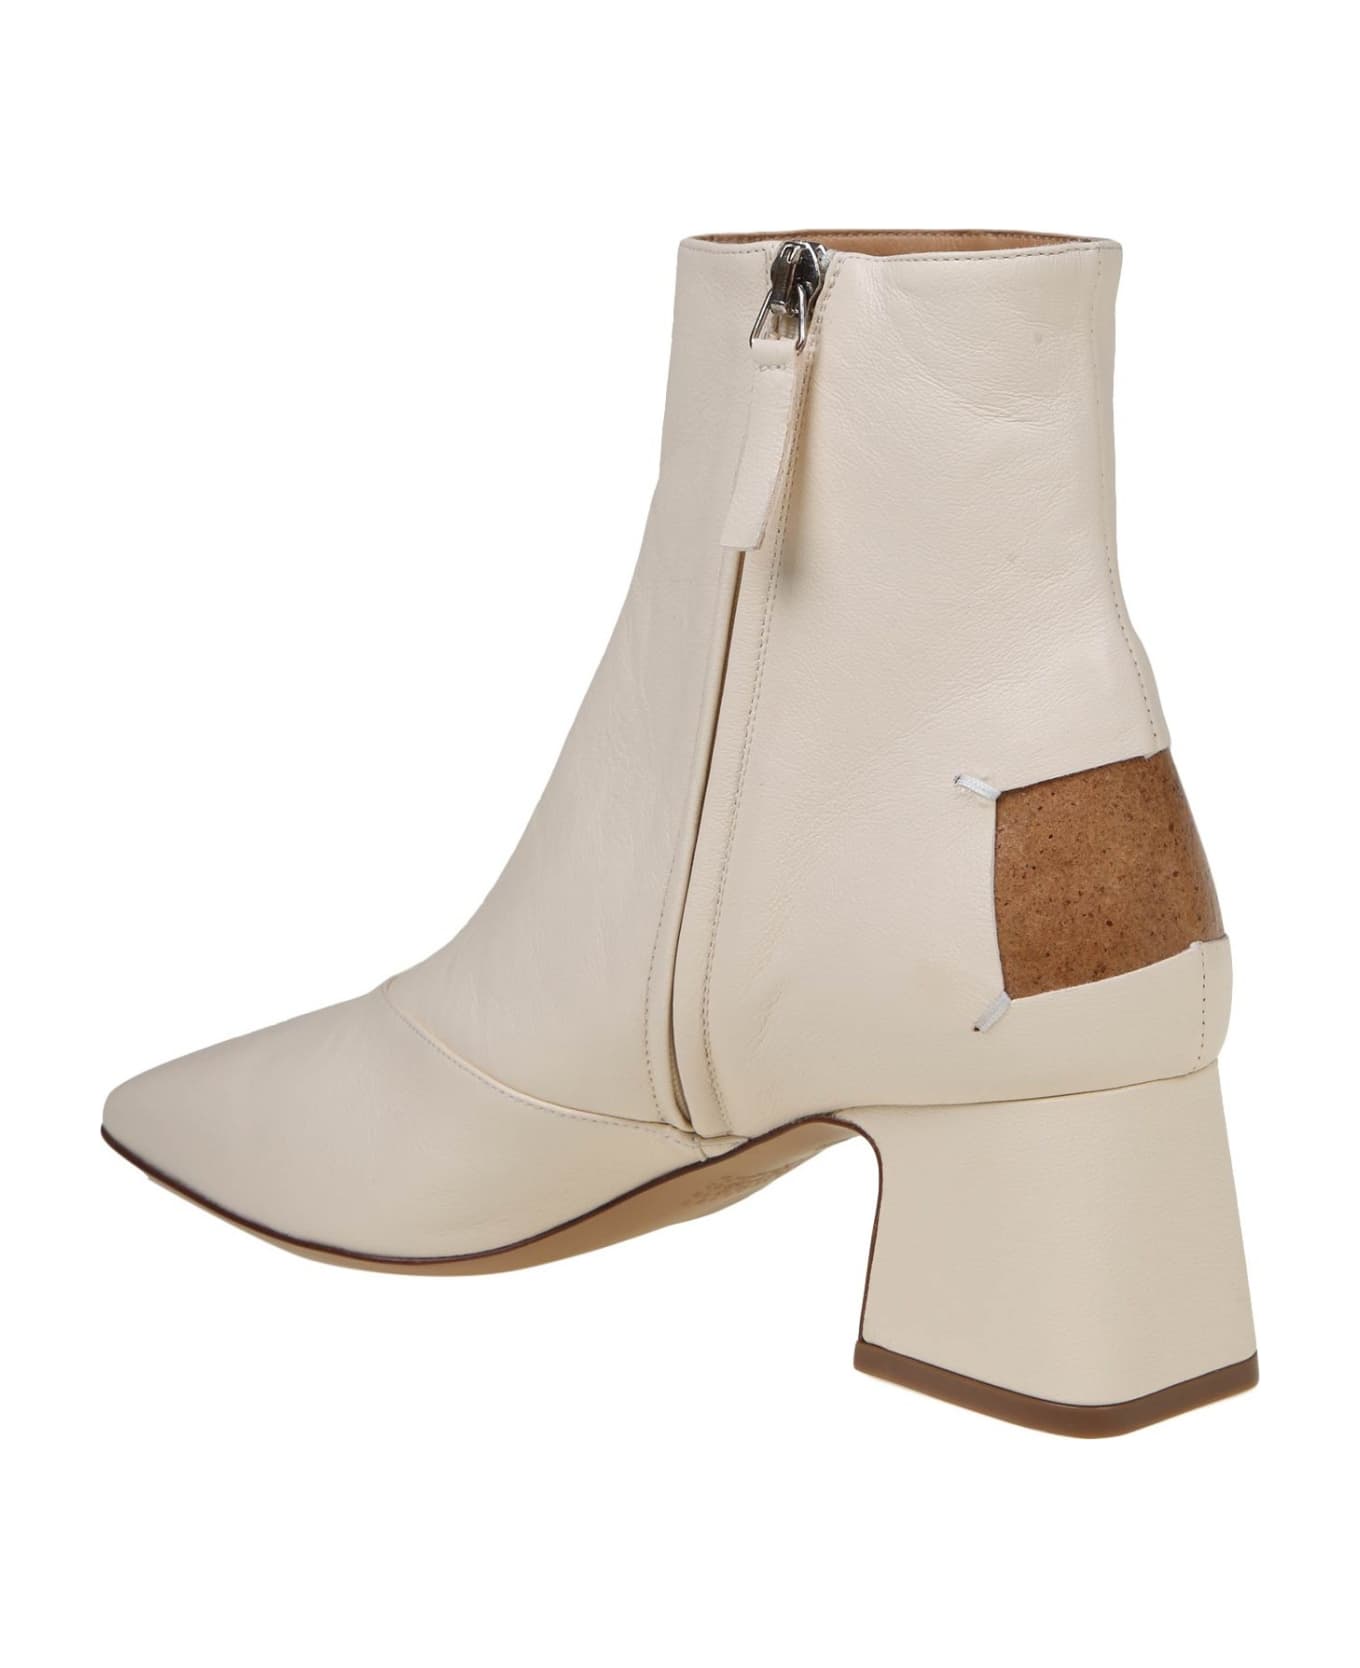 Maison Margiela Ankle Boot Four Stitches In Cream Color Leather - CREAM